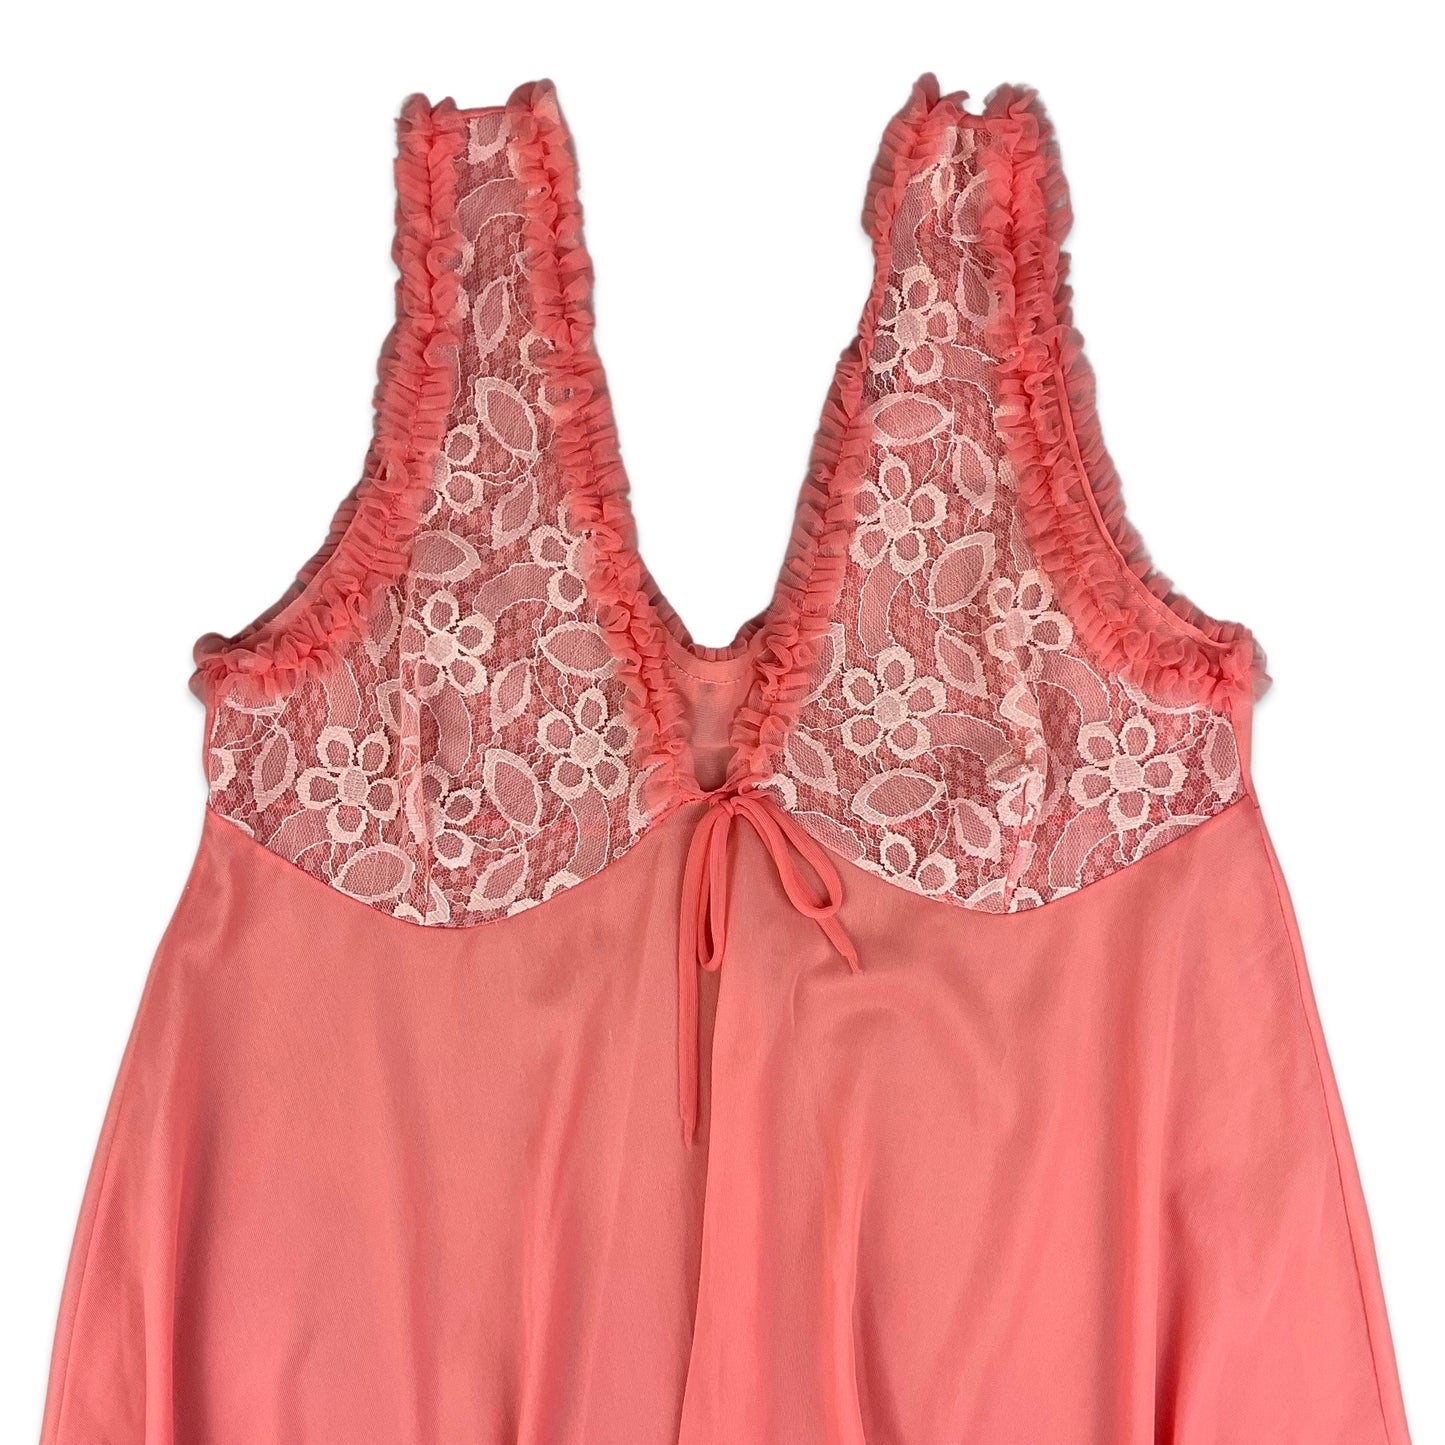 Vintage Coral & White Lace Babydoll Top